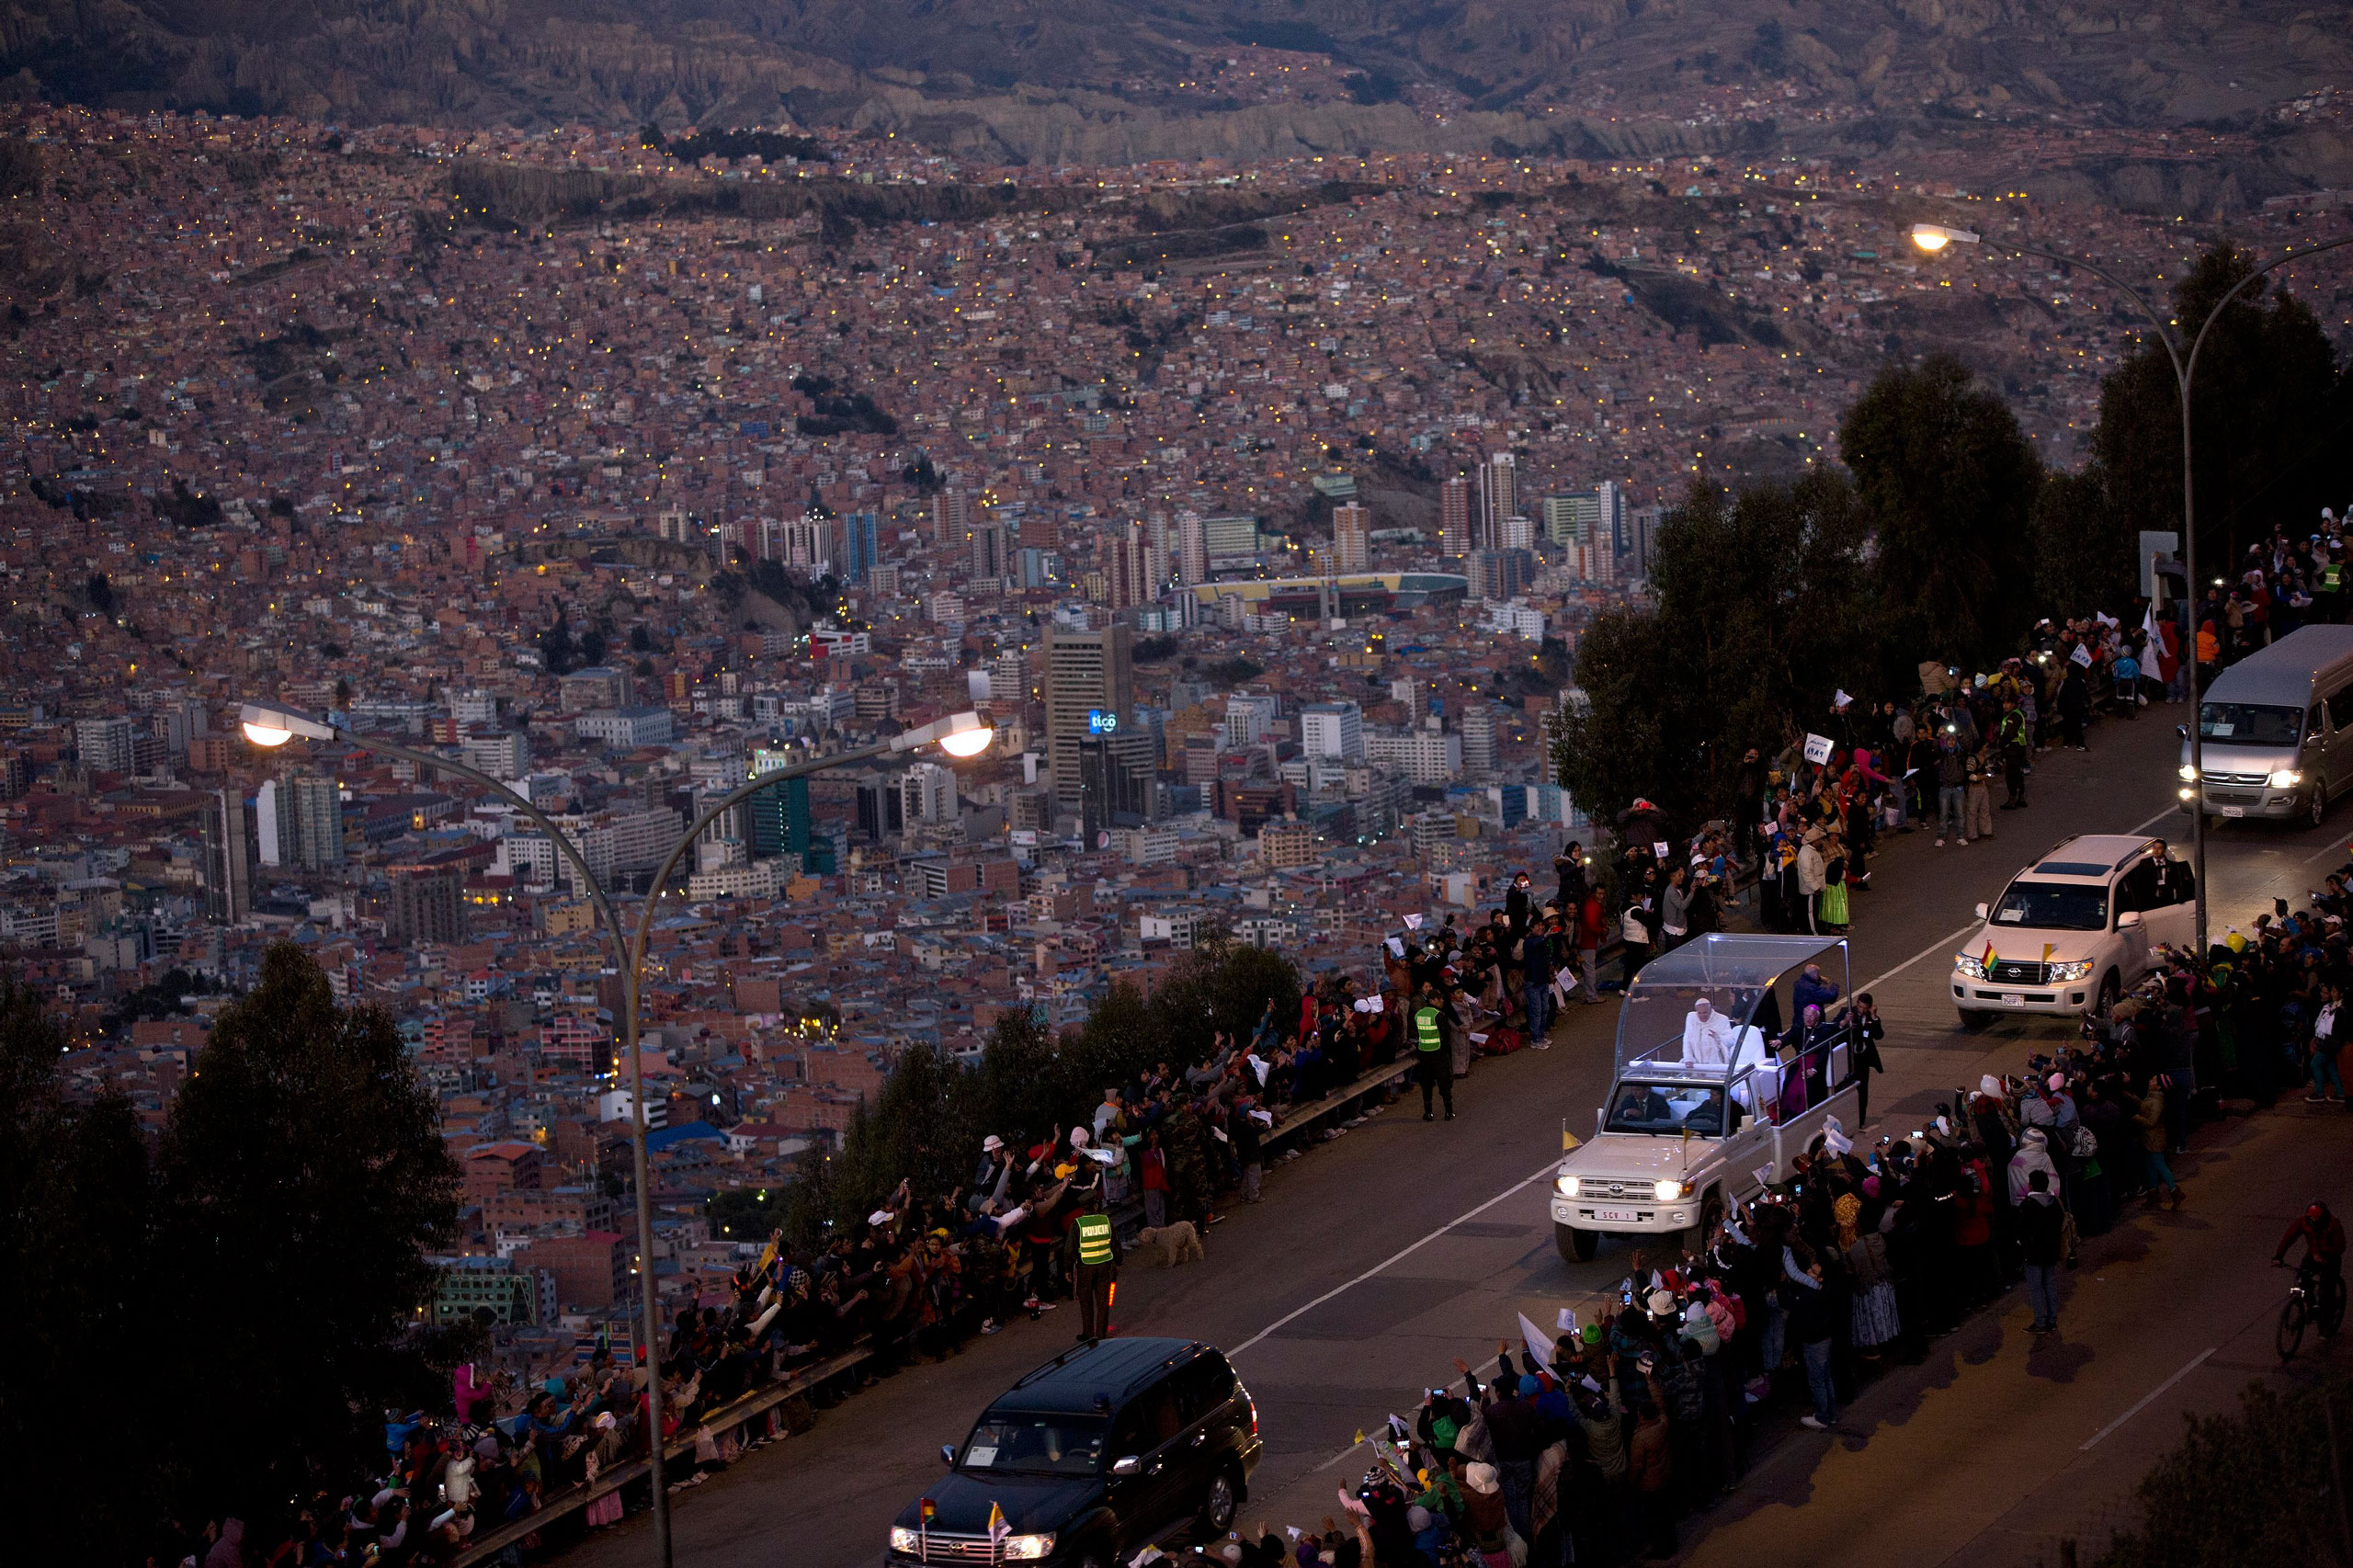 Pope Francis waves to the crowd lining the road to La Paz, as he rides aboard the popemobile from El Alto, Bolivia, on July 8, 2015.